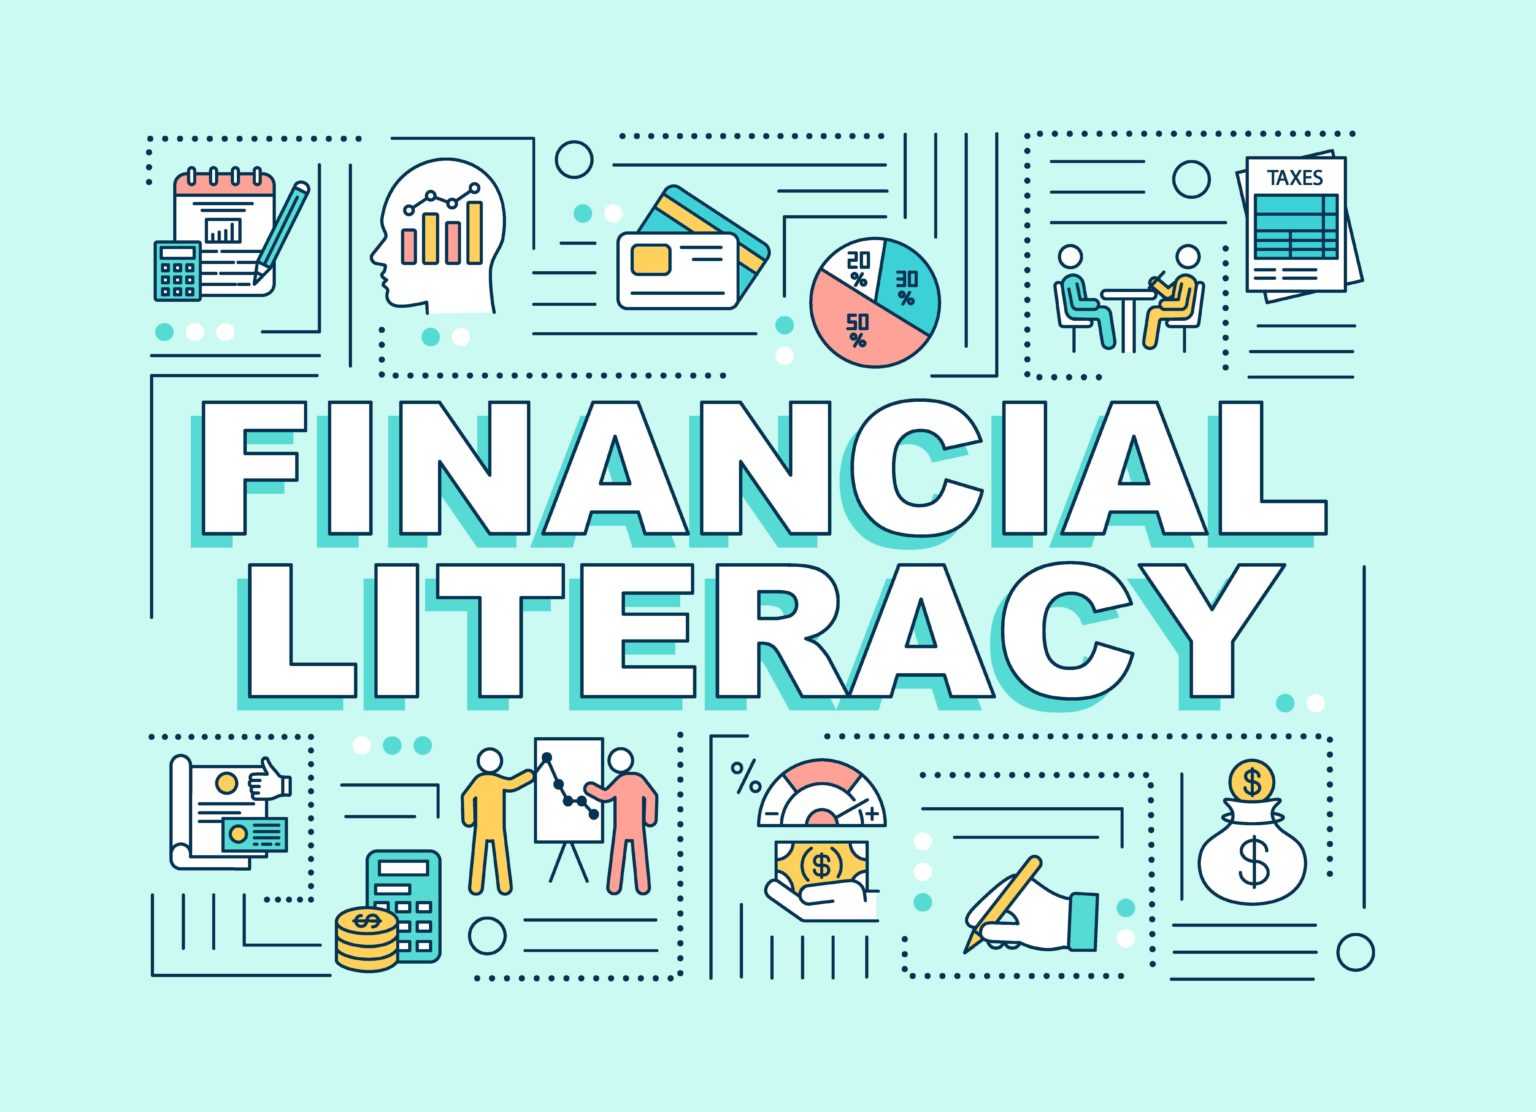 Explained Current State of Malaysian Financial Literacy